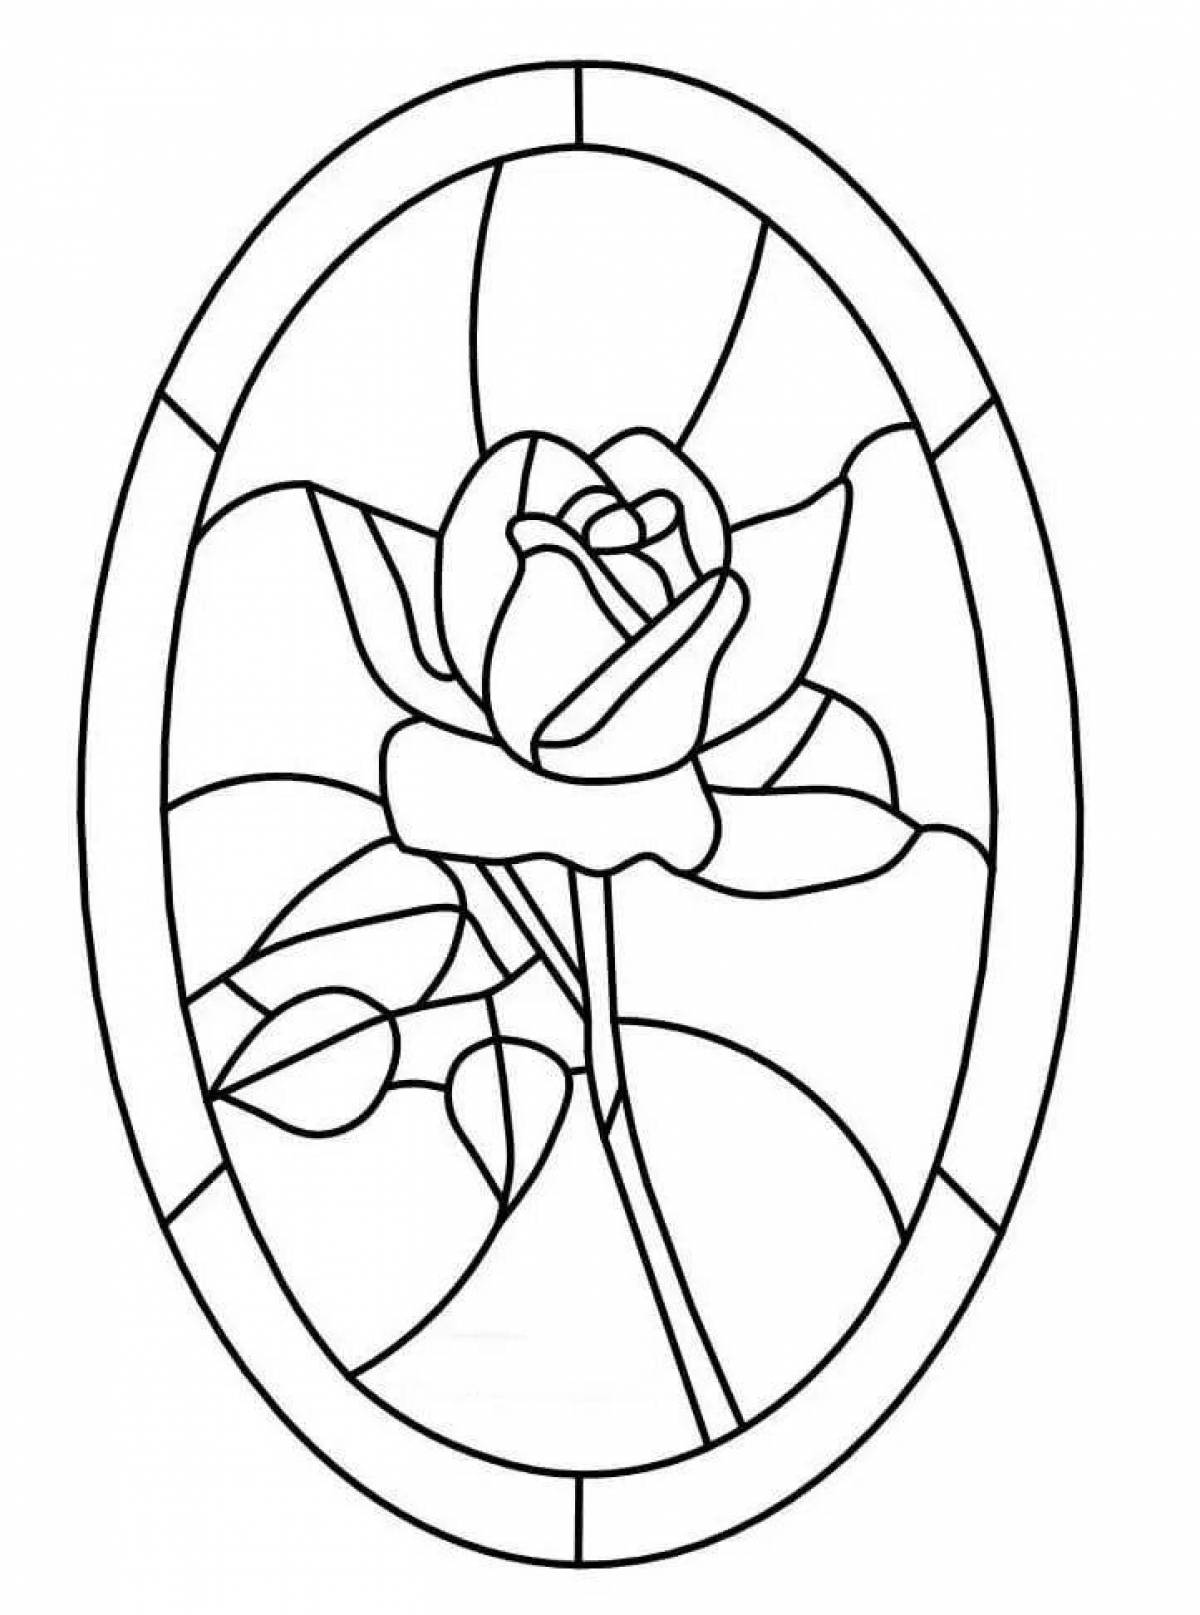 Large stained glass window coloring page